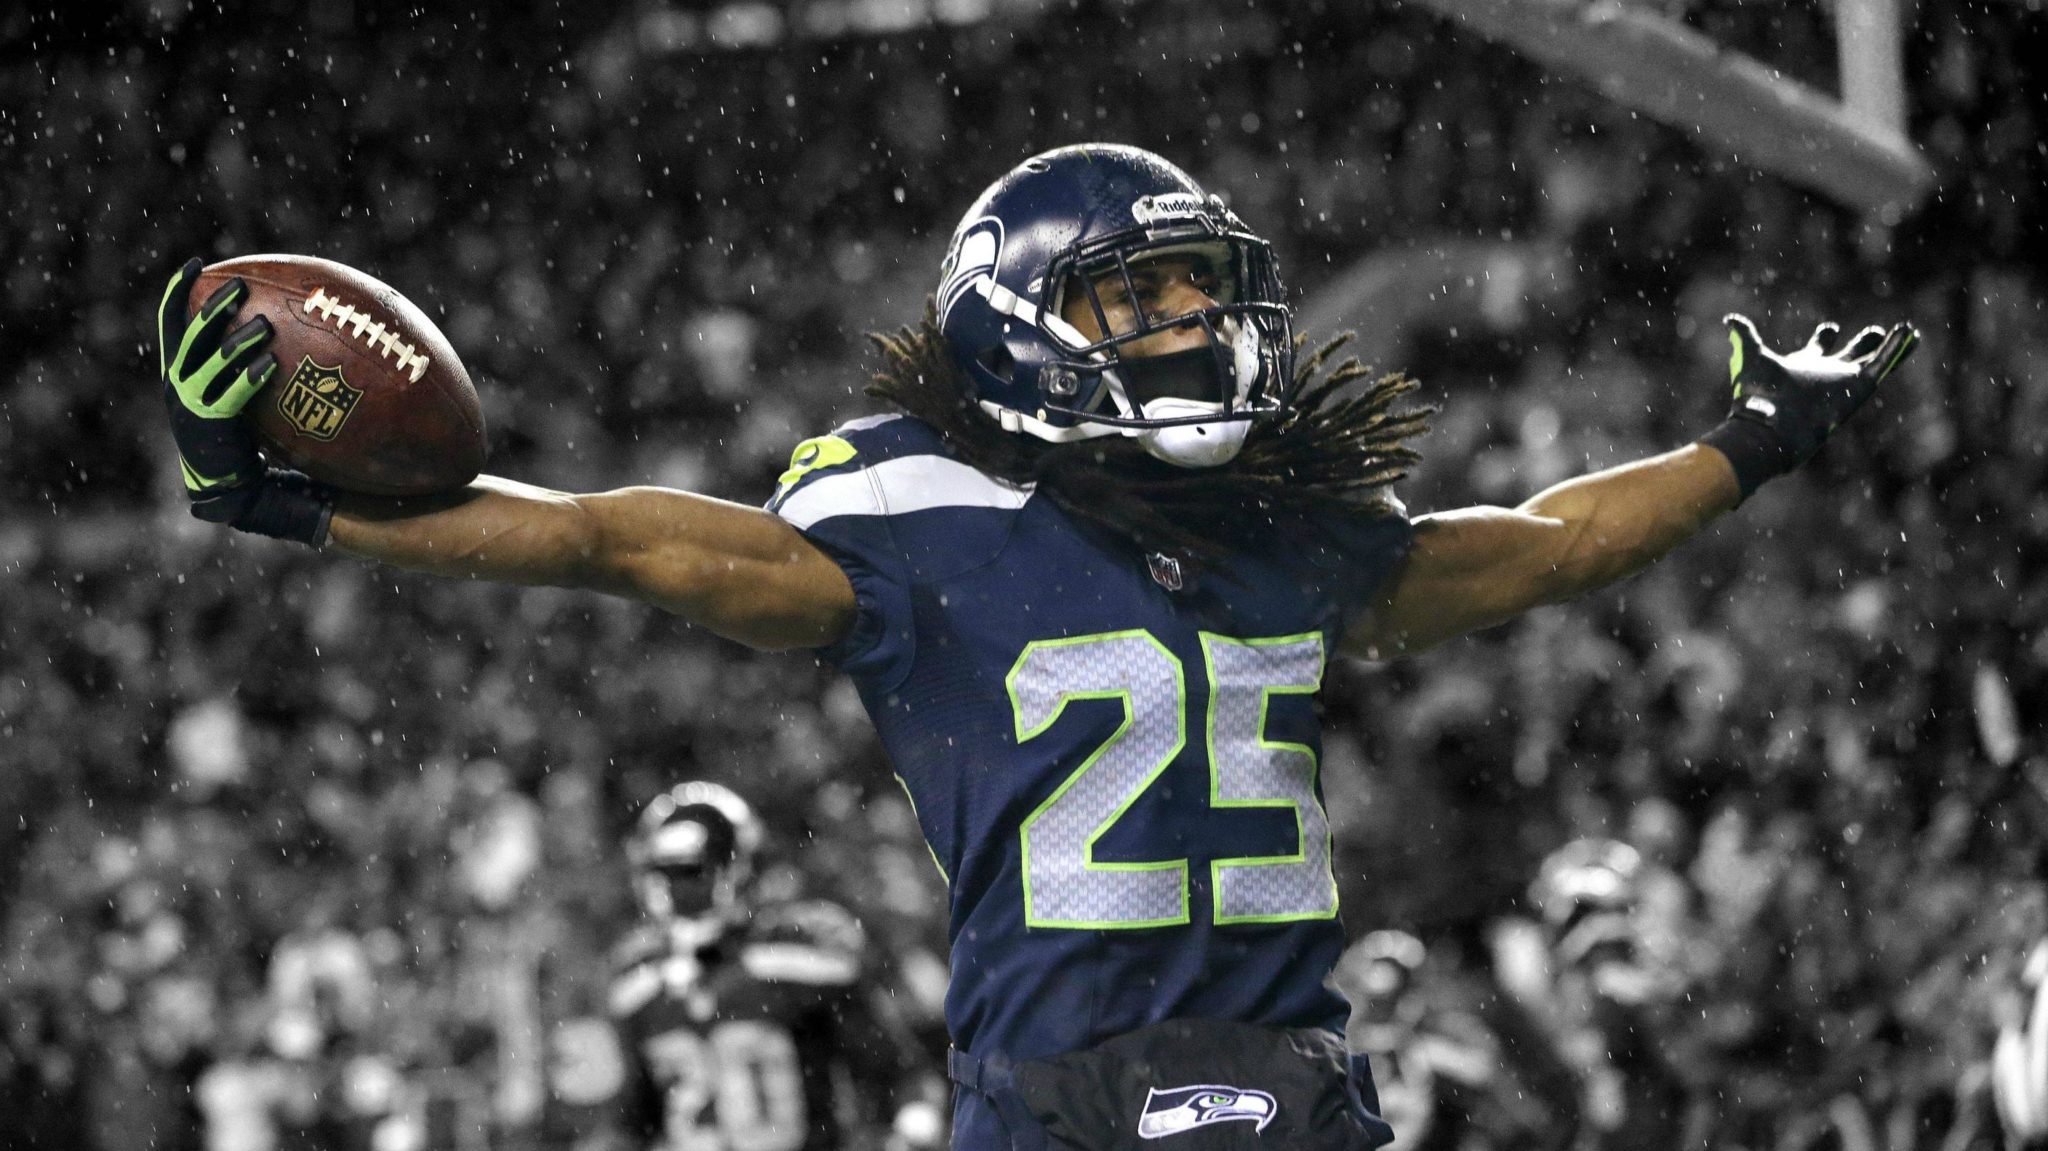 Nfl Wallpapers Free - Richard Sherman And Cam Newton , HD Wallpaper & Backgrounds